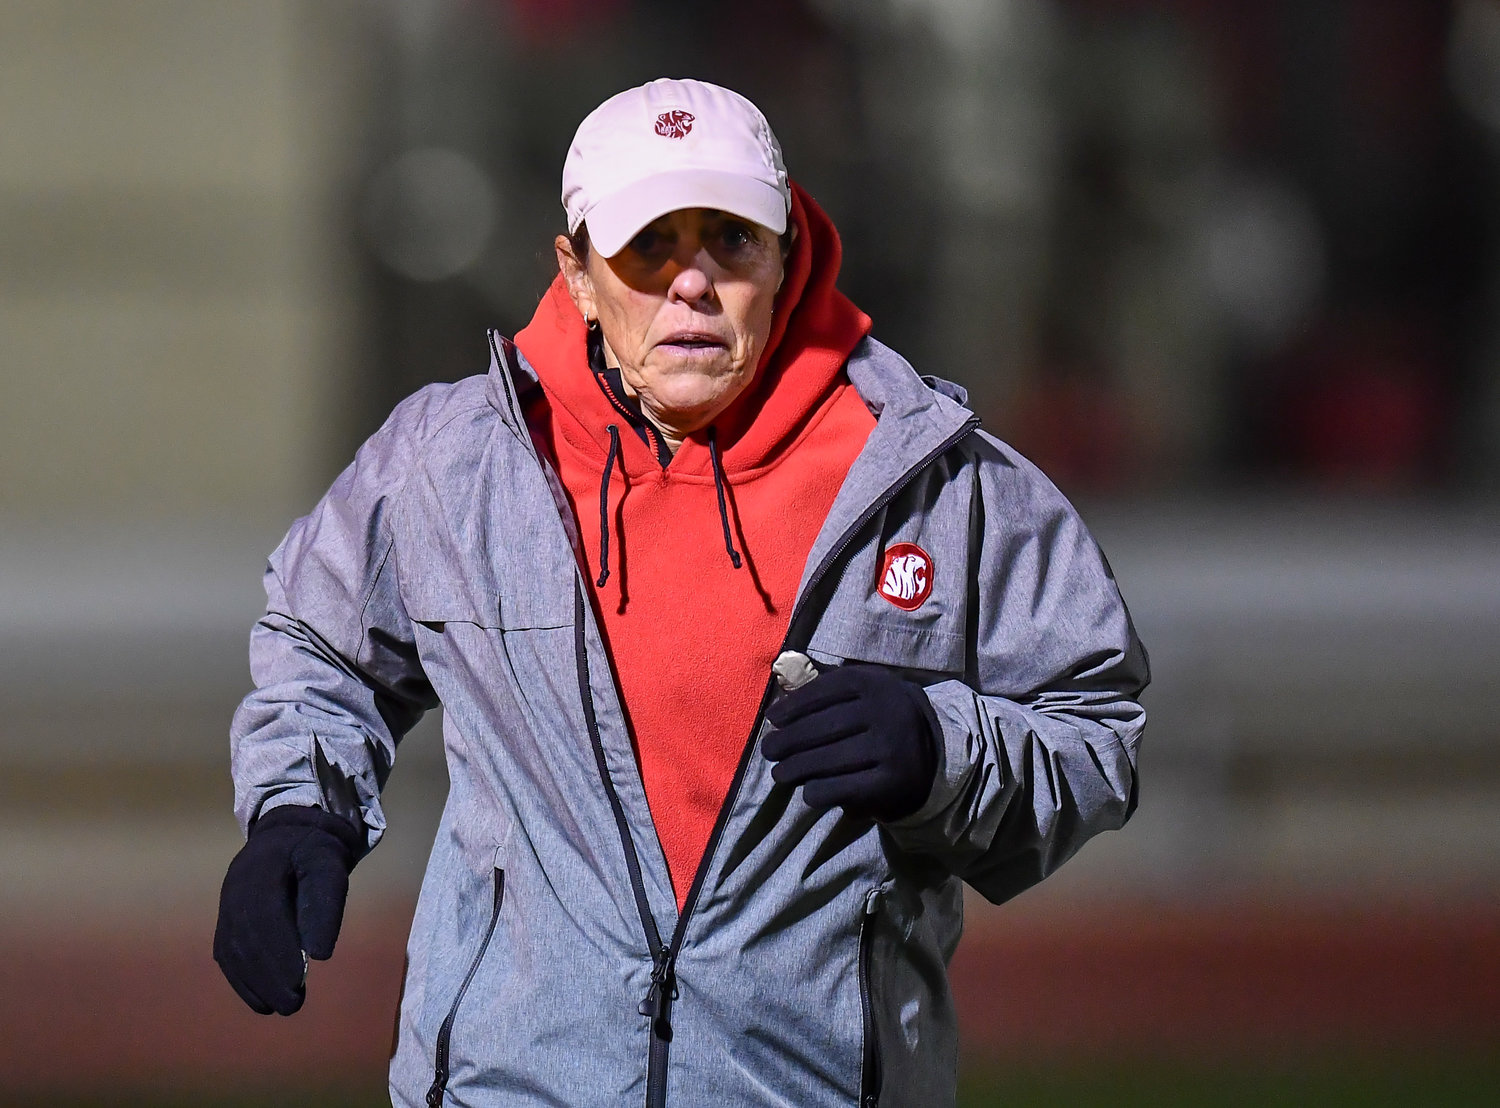 March 8,, 2022: Katy's head coach Dianne Loftin takes the field to start the second half of the soccer match between Katy an Katy Taylor. (Photo by Mark Goodman / Katy Times)